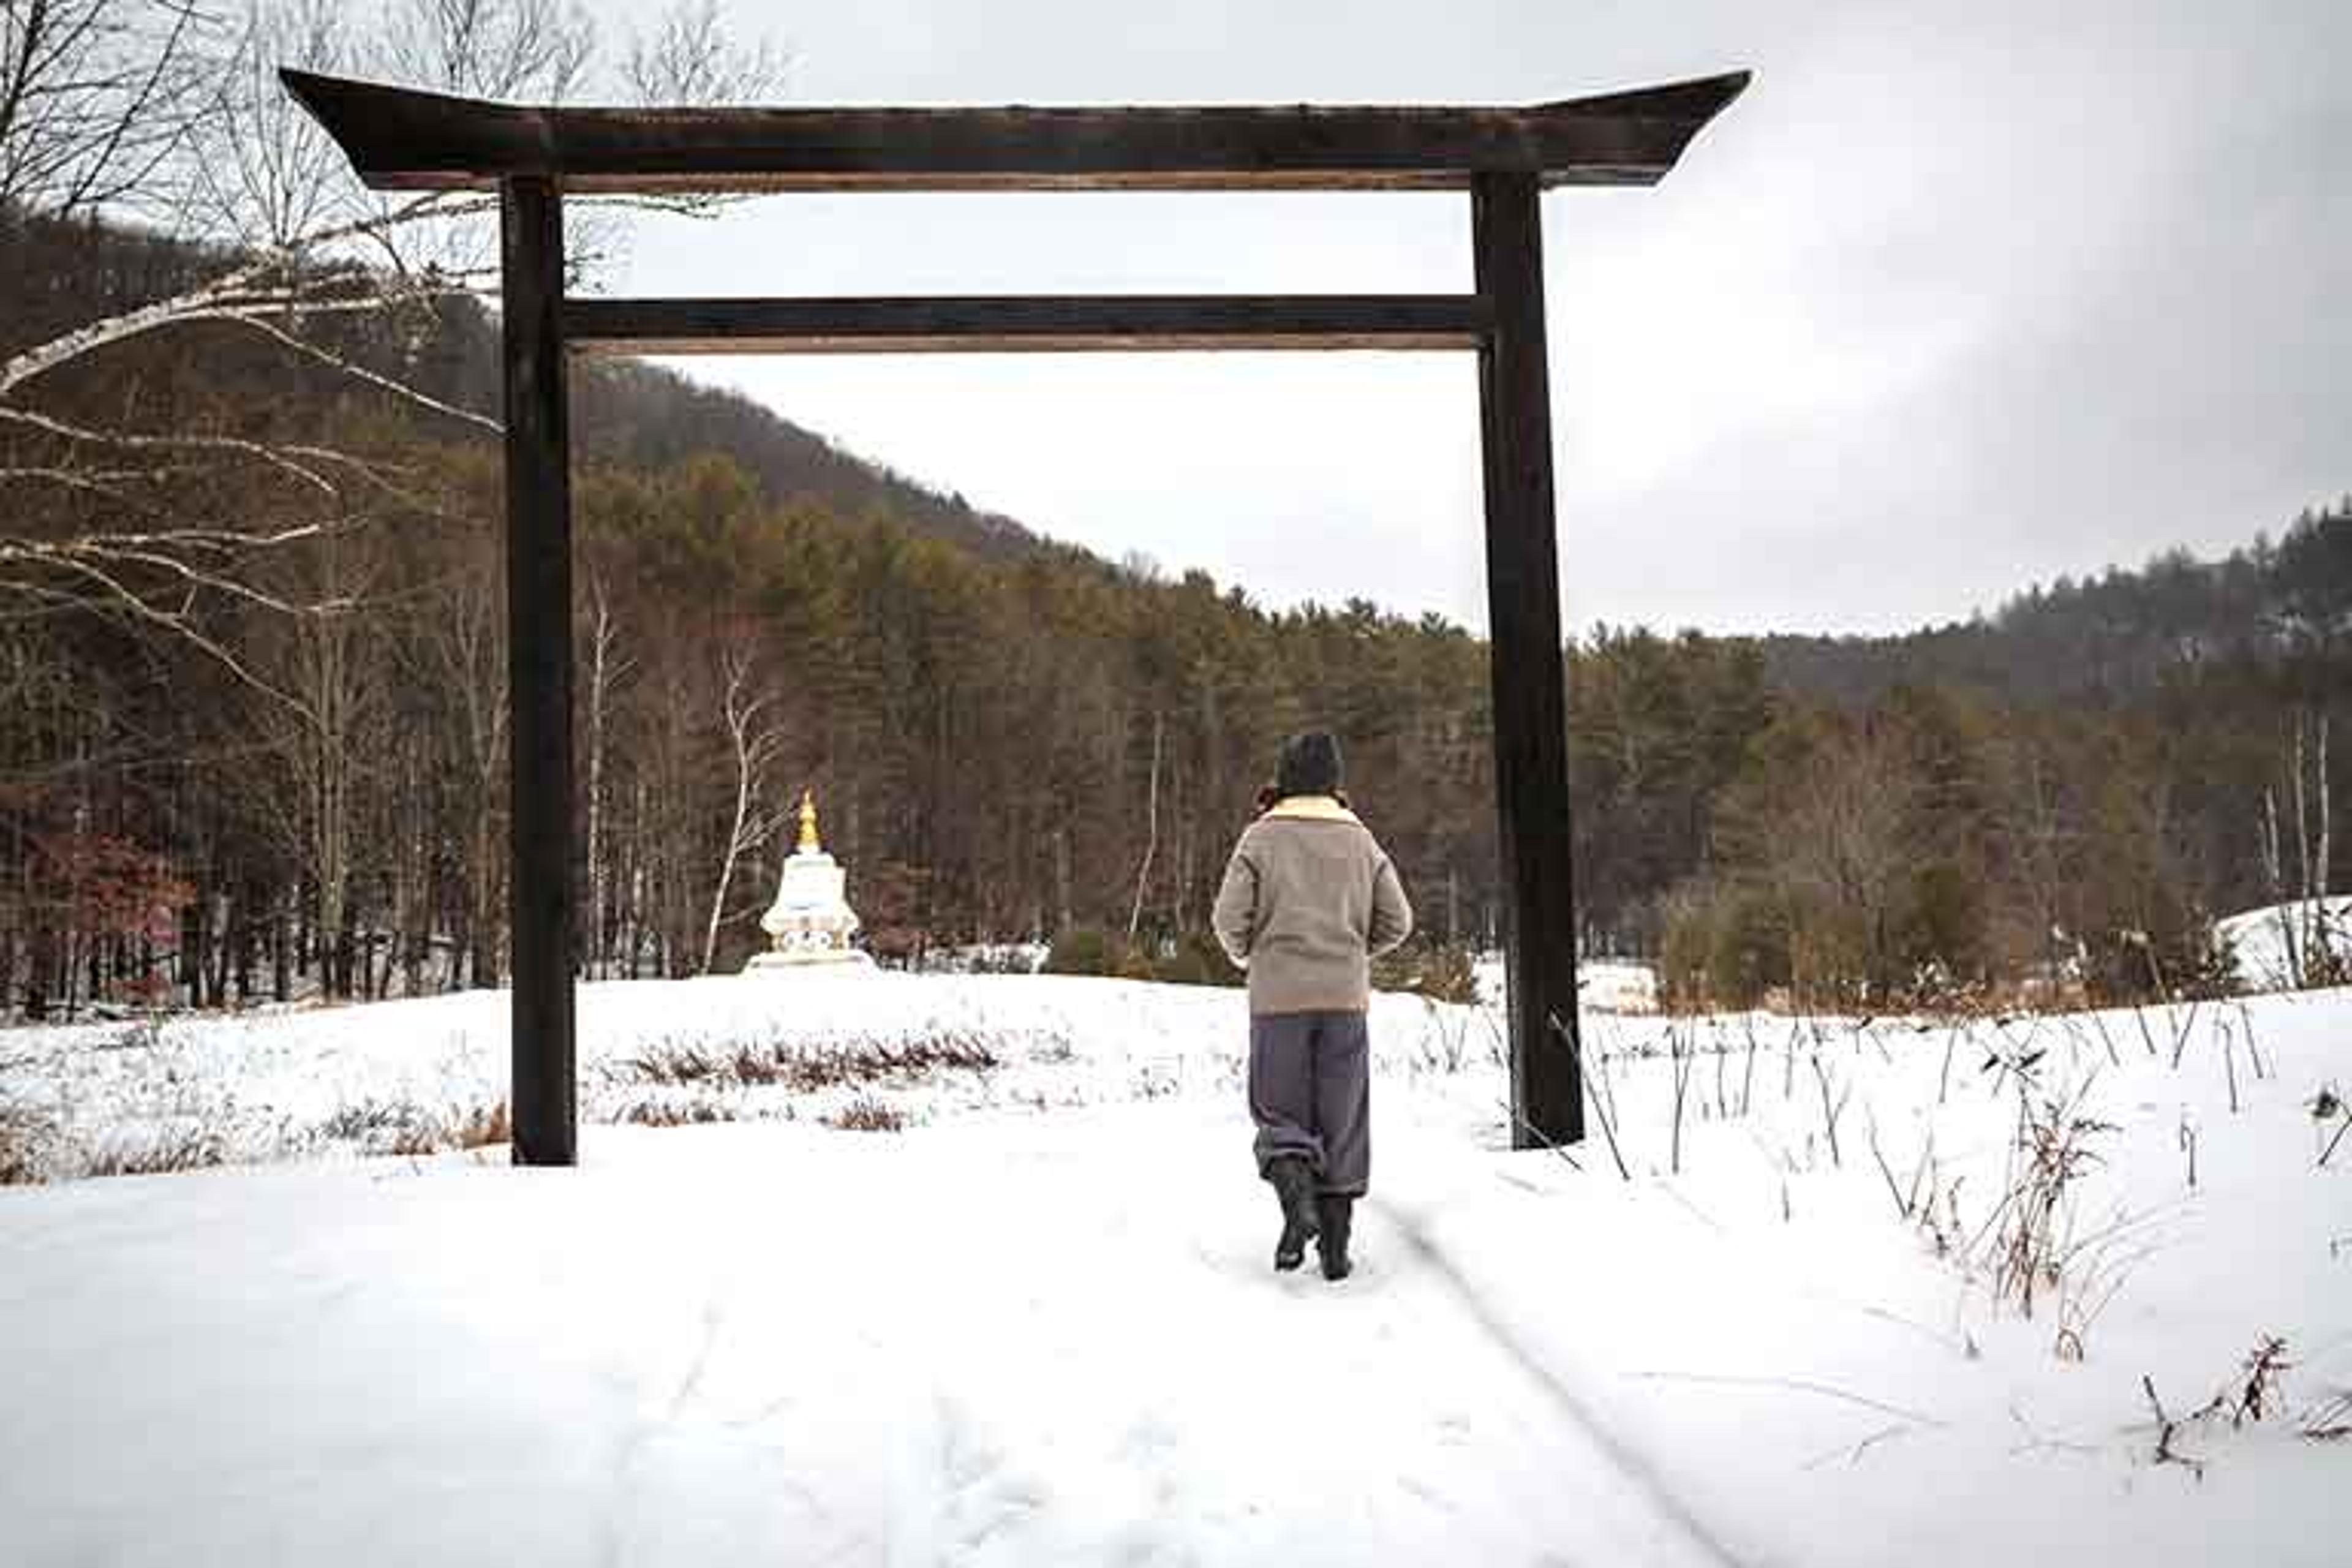 Torii Gate and Purkhang at Karme Choling meditation retreat center in Vermont